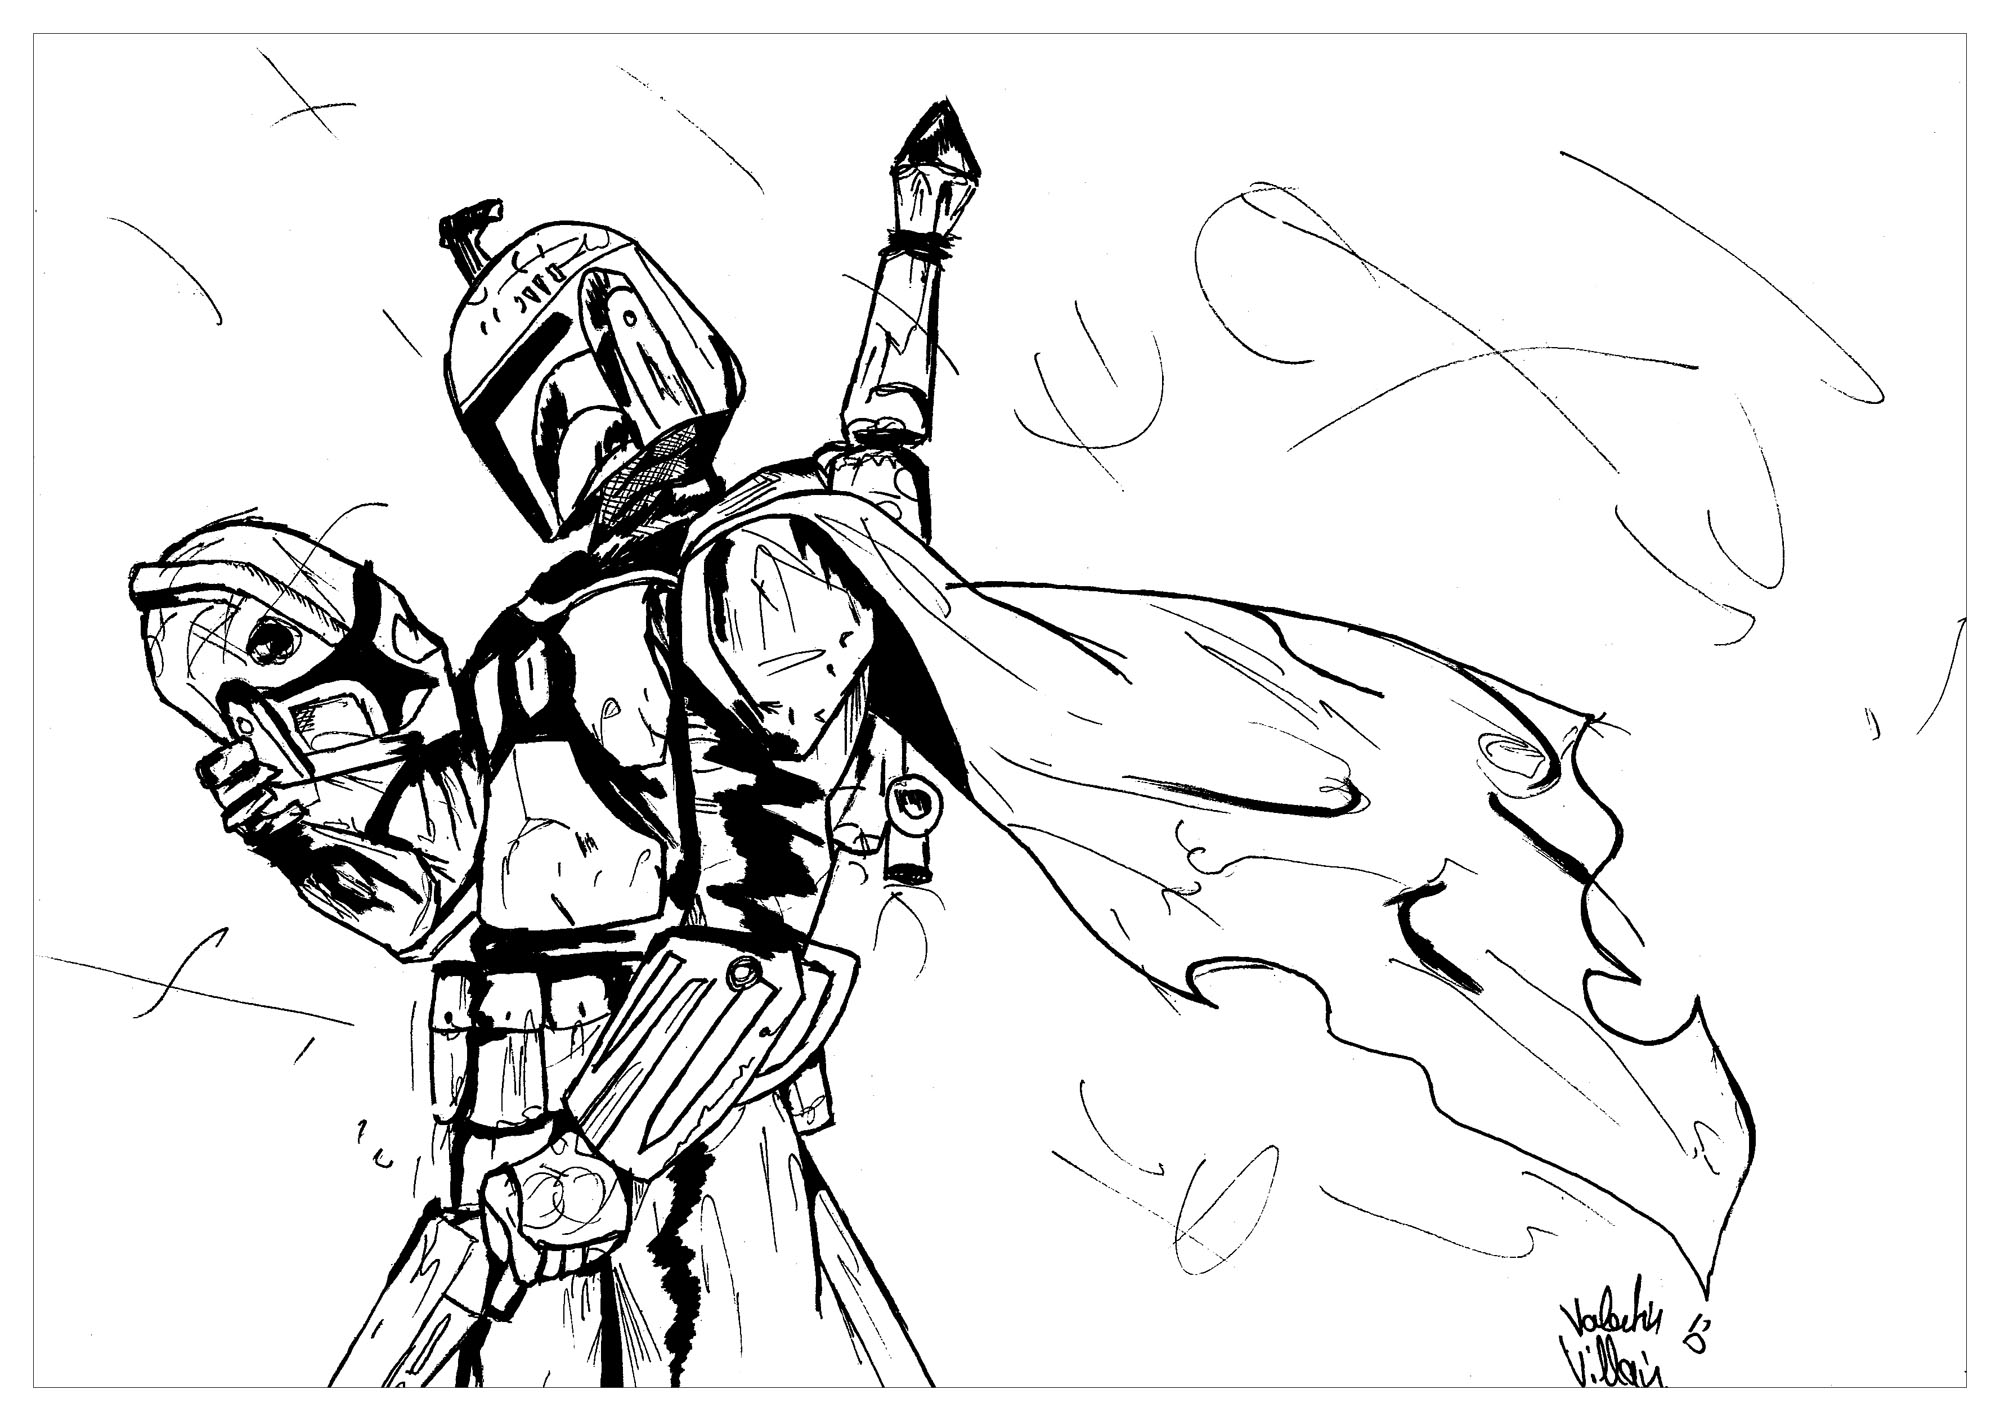 Coloring page of Boba Fett the bounty hunter in the Star Wars Saga, Artist : Valentin